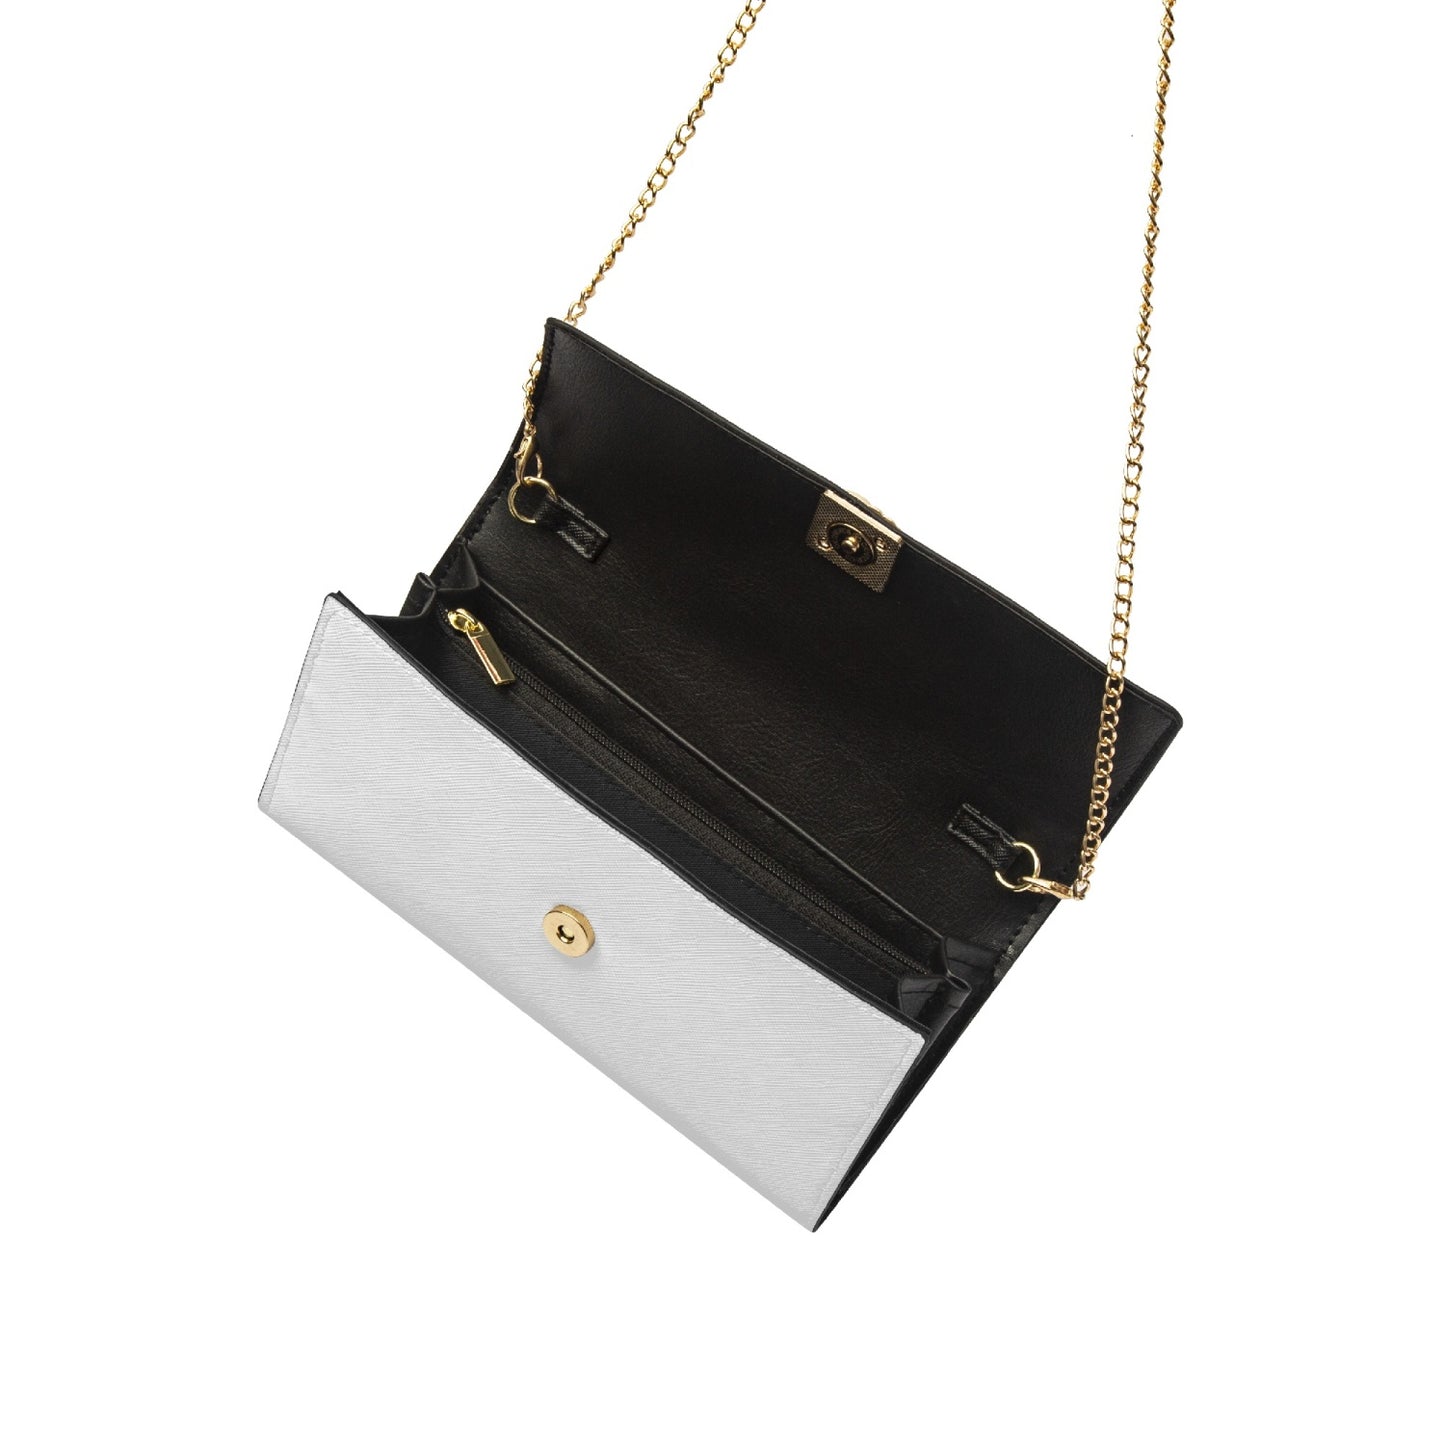 Ladies Shoulder Bag with Chain Strap